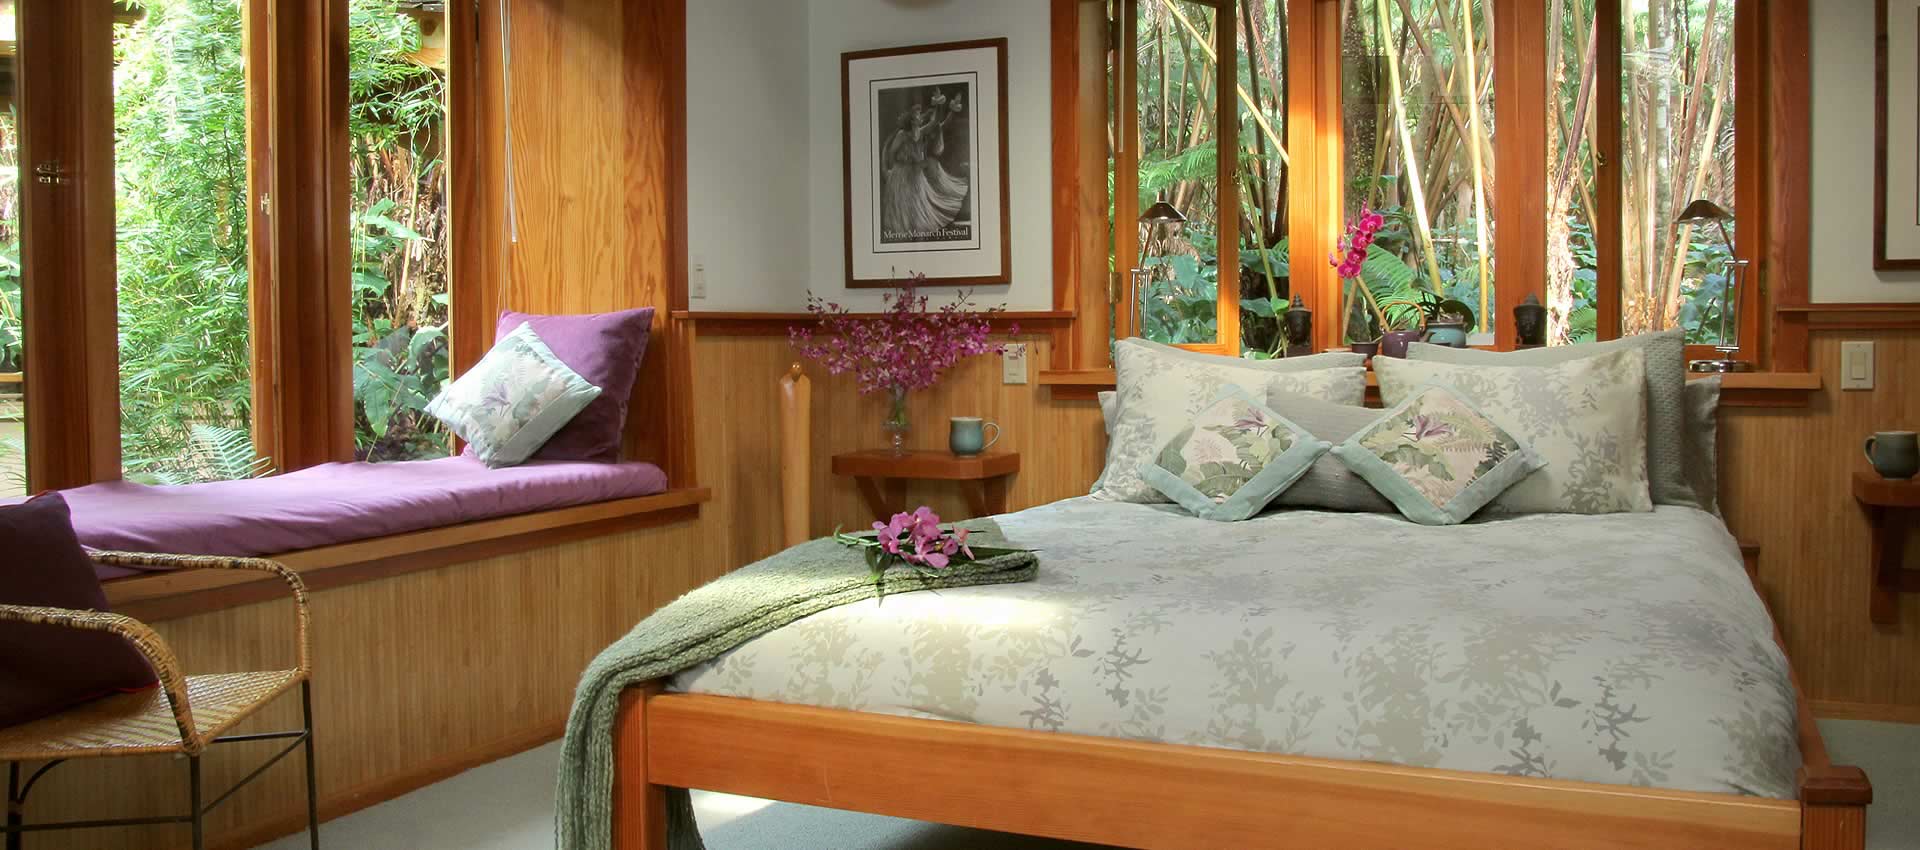 Bamboo Guest House bedroom with queen bed and window seat.